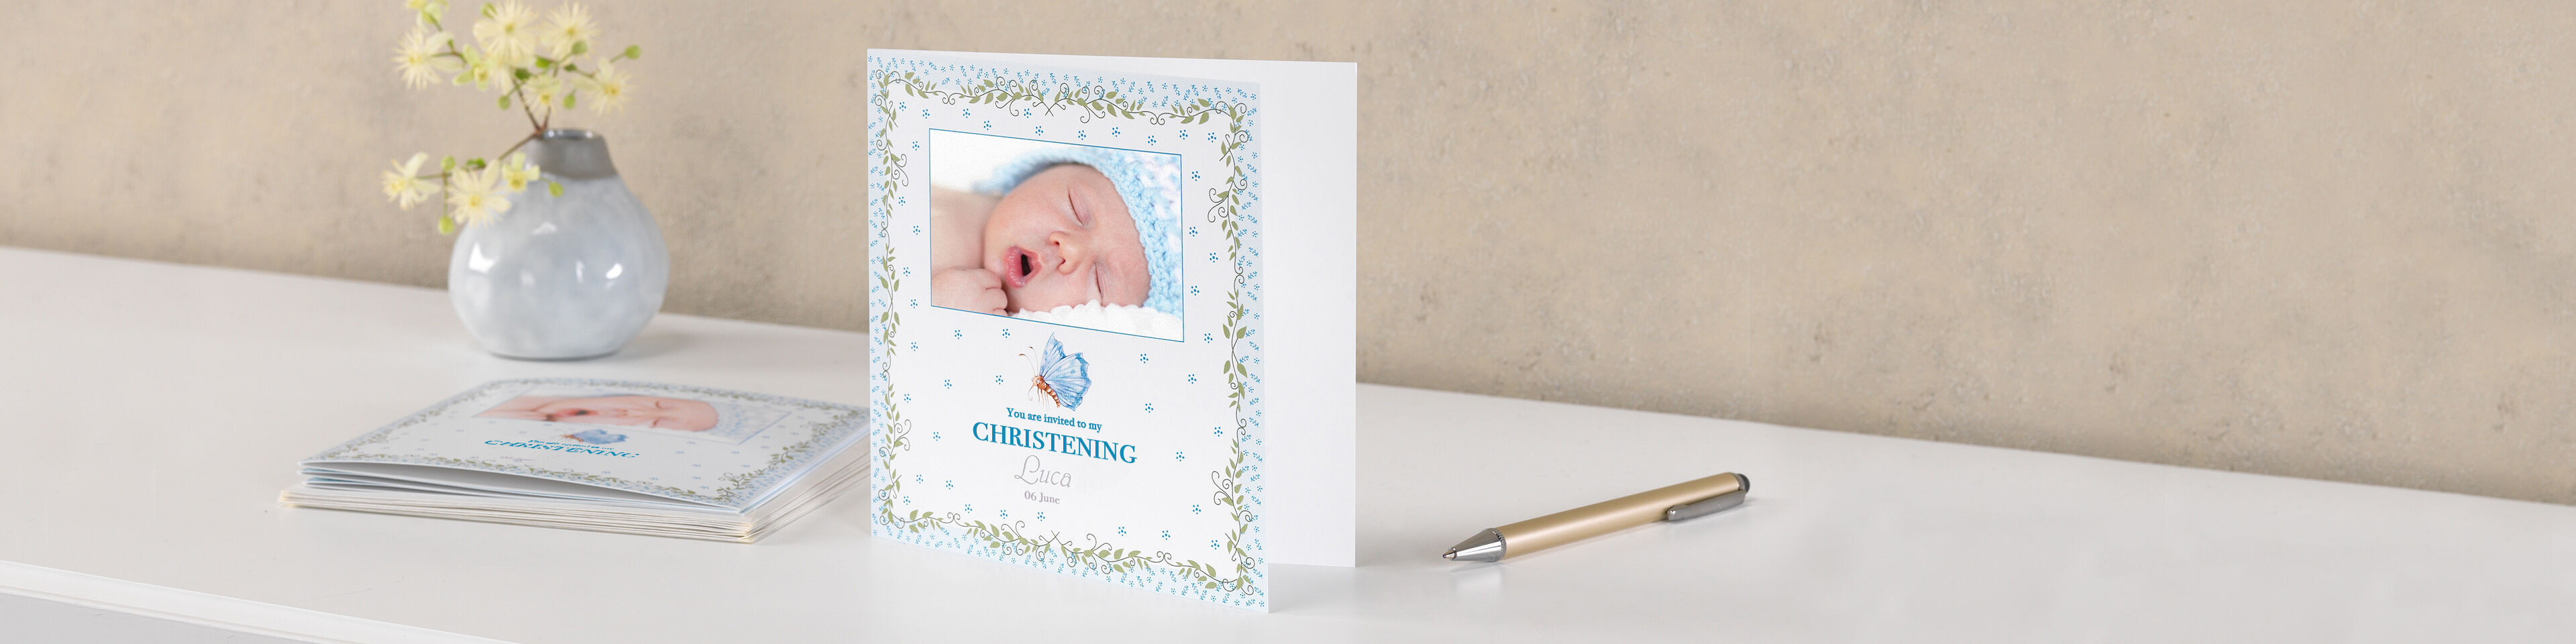 square photo greetings card for announcing christenings